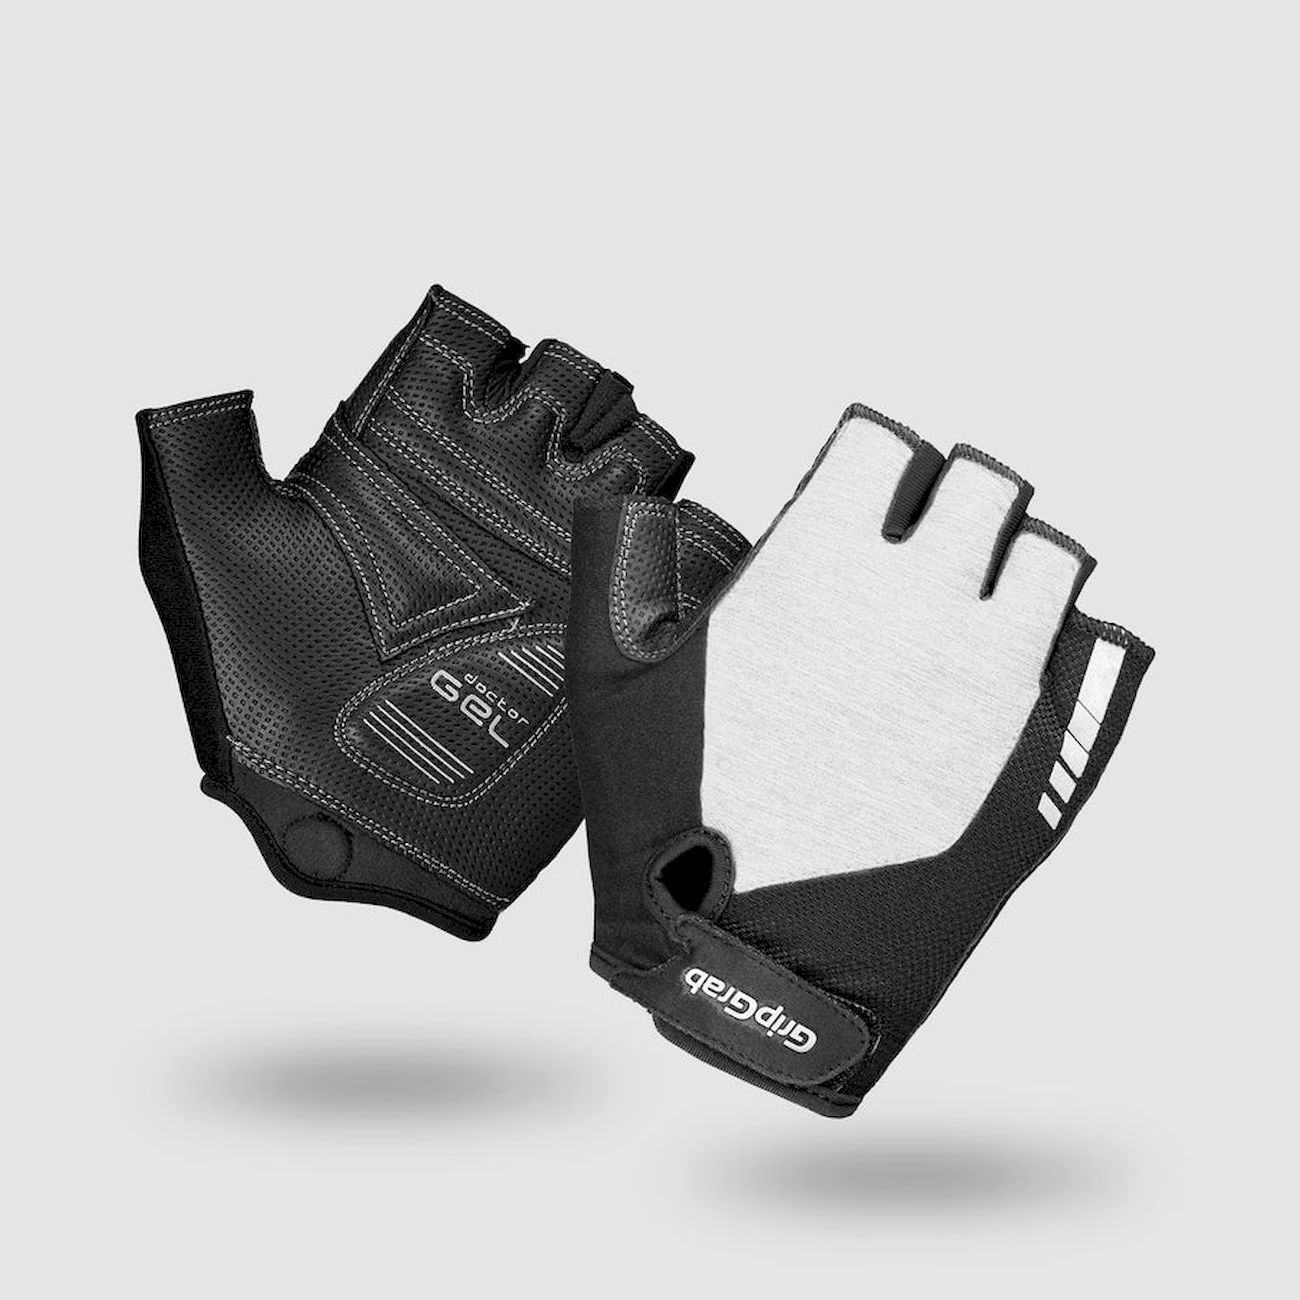 Grip Grab ProGel Padded Gloves - Guanti corti ciclismo - Donna